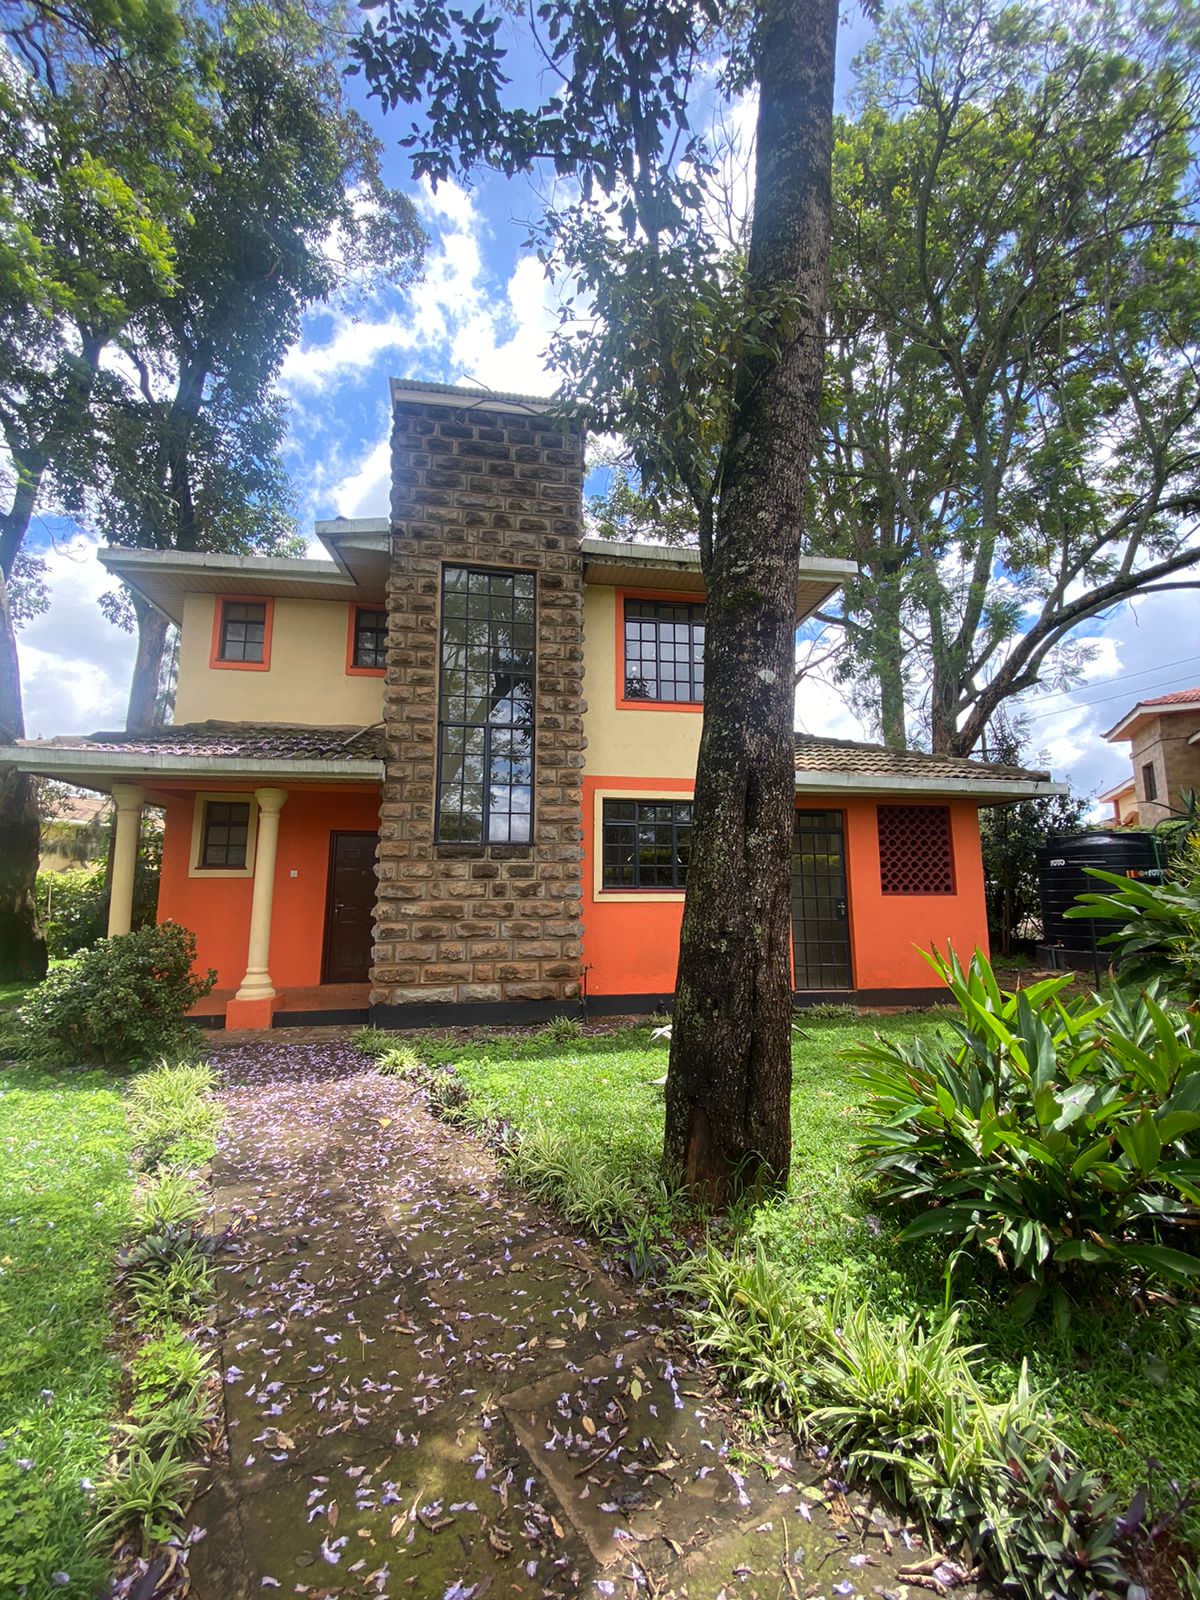 Exquisite 3 bedroom plus detached dsq in a gated community to LET along Kiambu Road. Touching tarmac. Rent Kshs 130k Musilli Homes